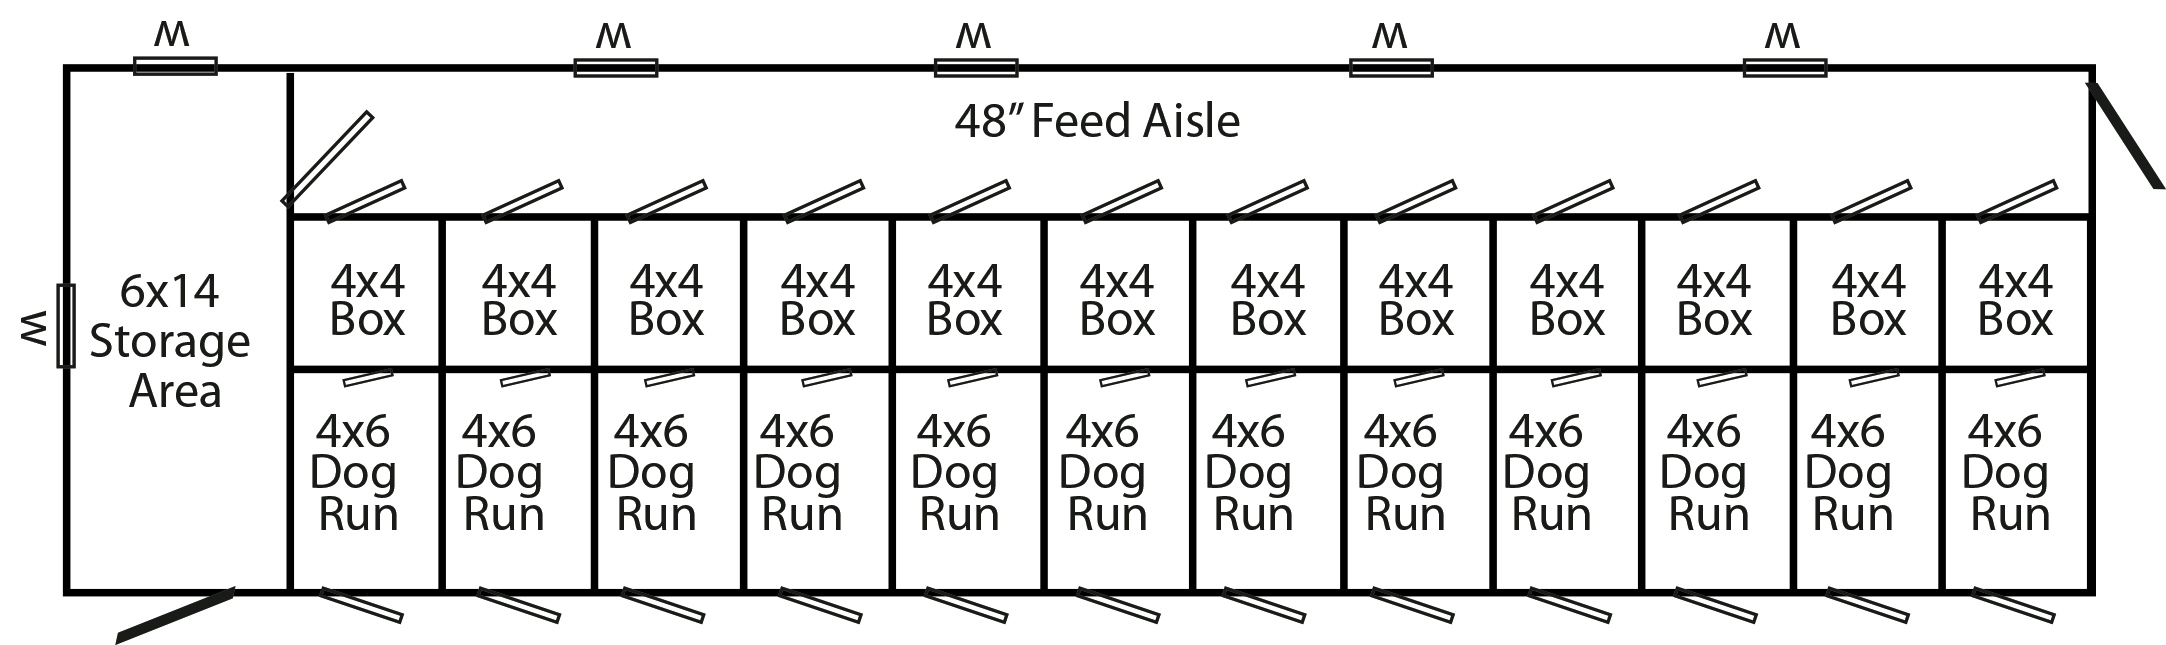 Floorplan of a 14x54 commercial kennel with 12-runs.